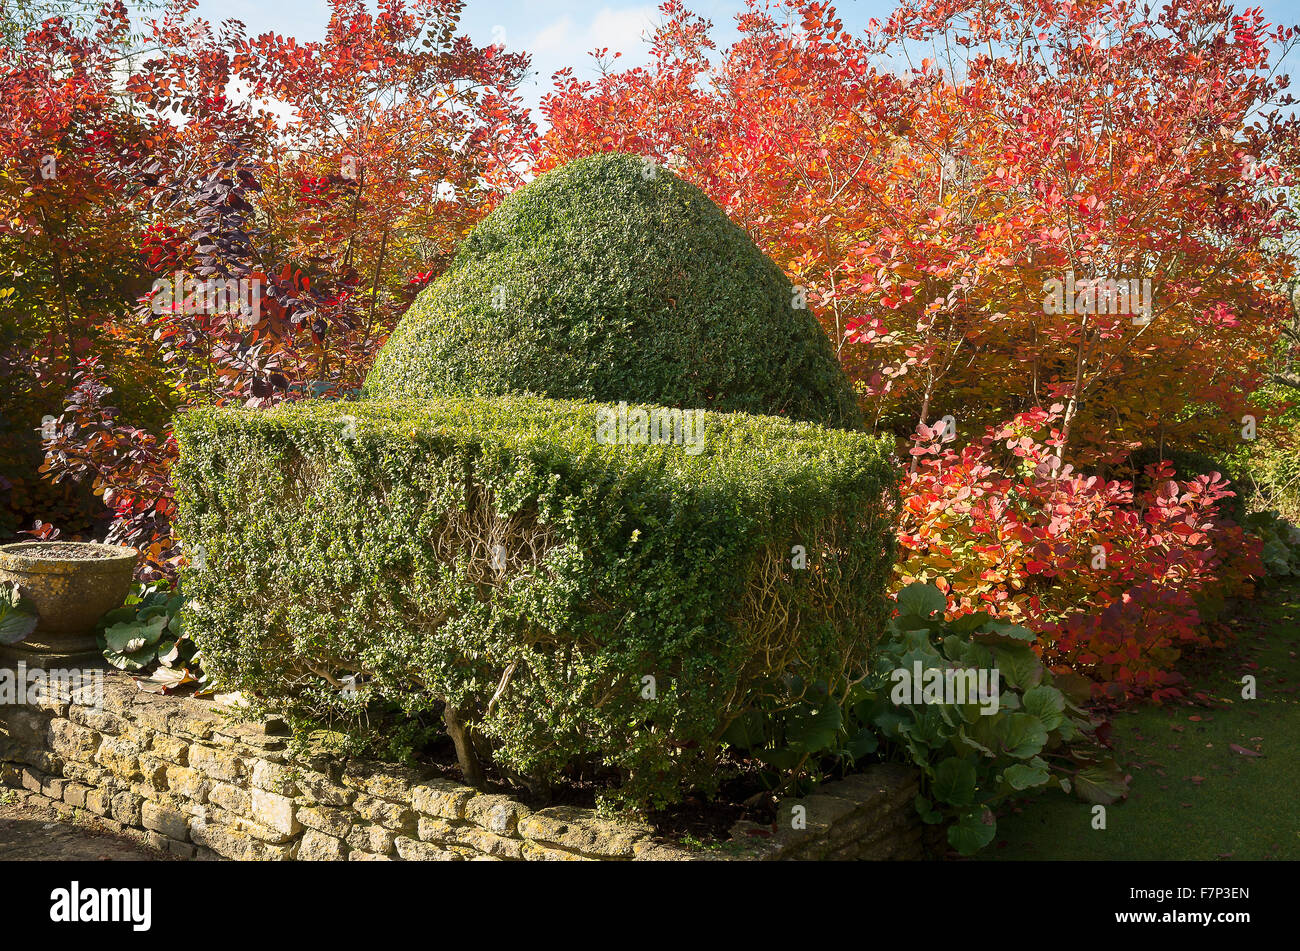 Trimmed box trees with cotinus foliage turning red in Autumn Stock Photo